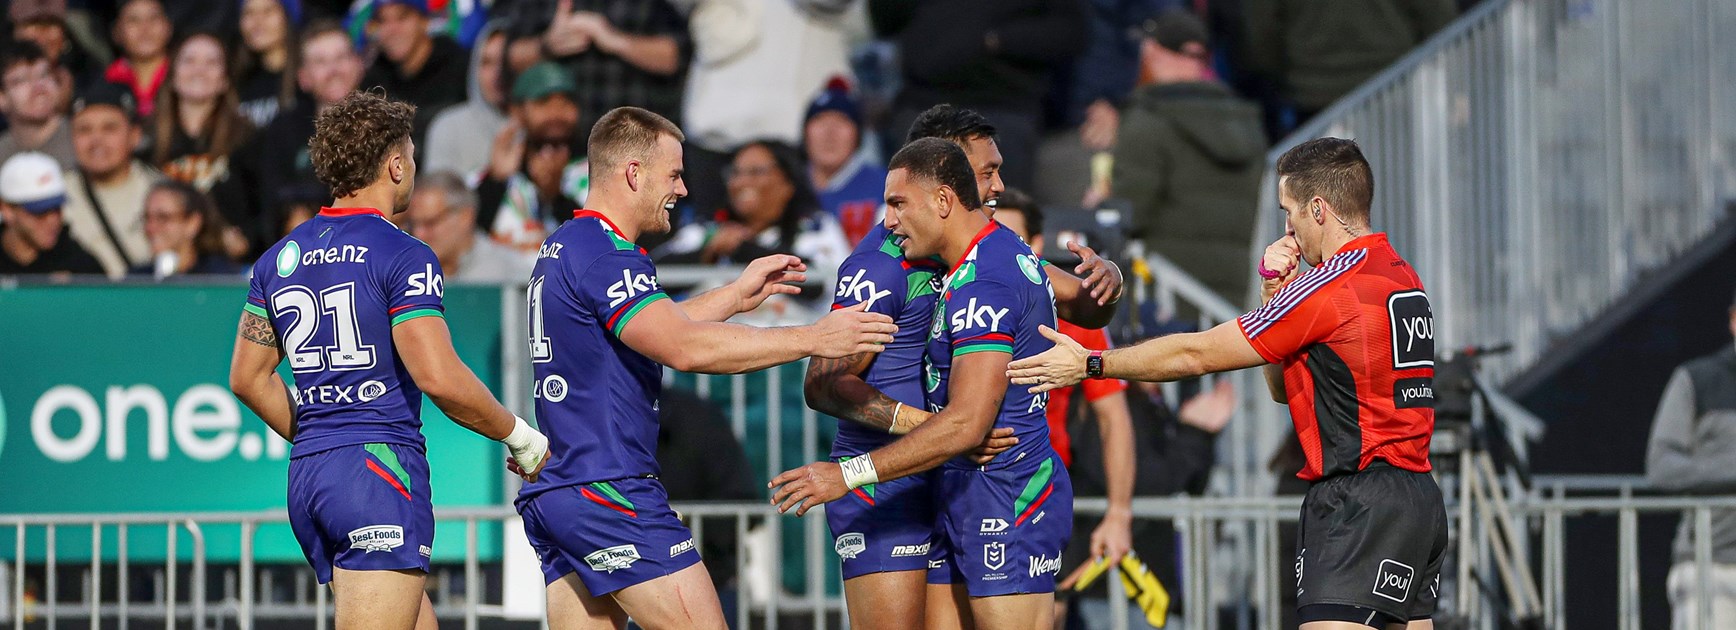 Warriors overcome Metcalf injury to down Knights at home